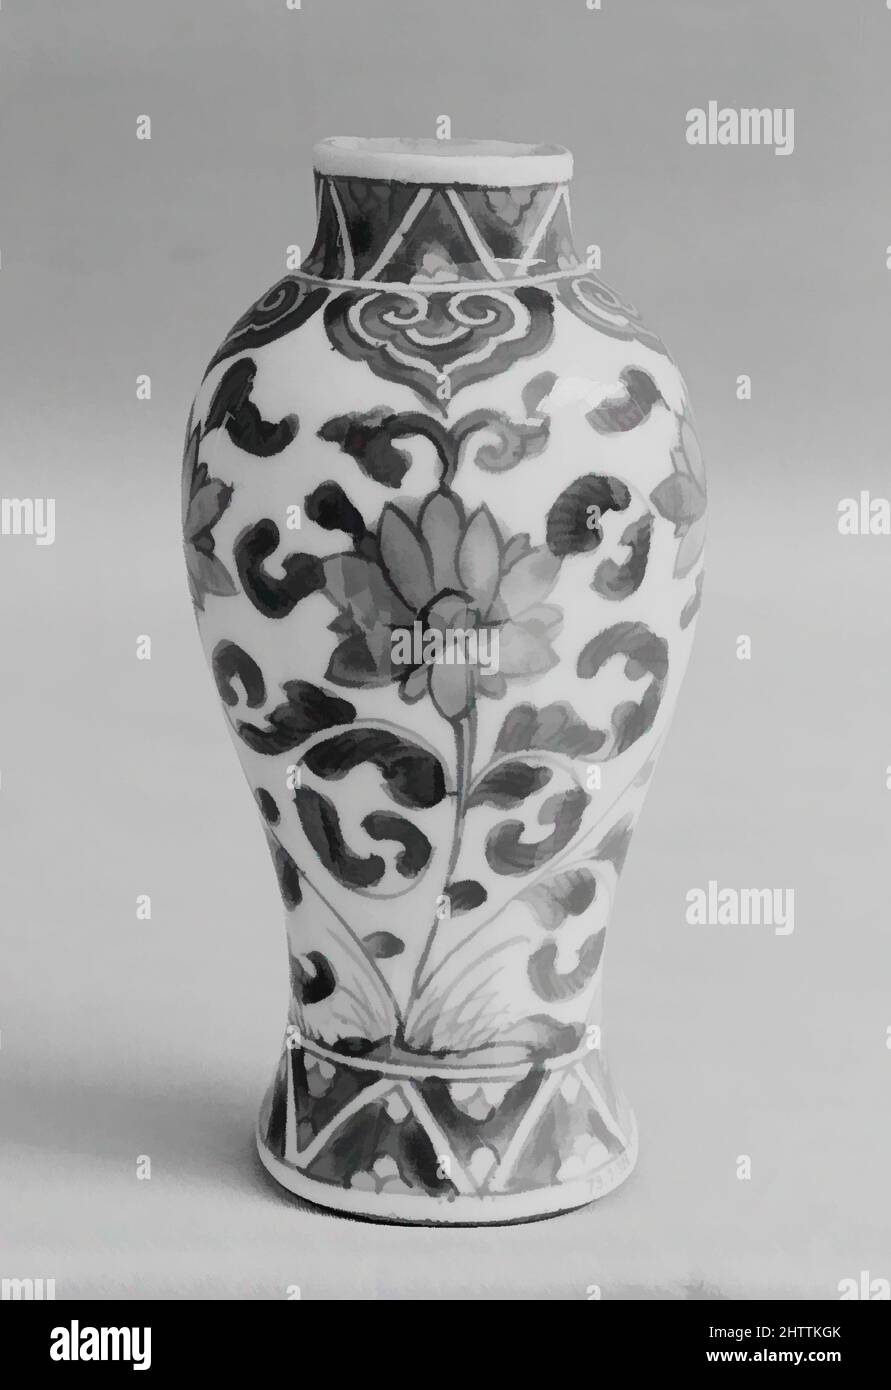 Art inspired by Hanging Vase, 19th century, Japan, White porcelain decorated with blue under the glaze (Arita ware, Imari type), H. 5 1/2 in. (14 cm), Ceramics, Classic works modernized by Artotop with a splash of modernity. Shapes, color and value, eye-catching visual impact on art. Emotions through freedom of artworks in a contemporary way. A timeless message pursuing a wildly creative new direction. Artists turning to the digital medium and creating the Artotop NFT Stock Photo